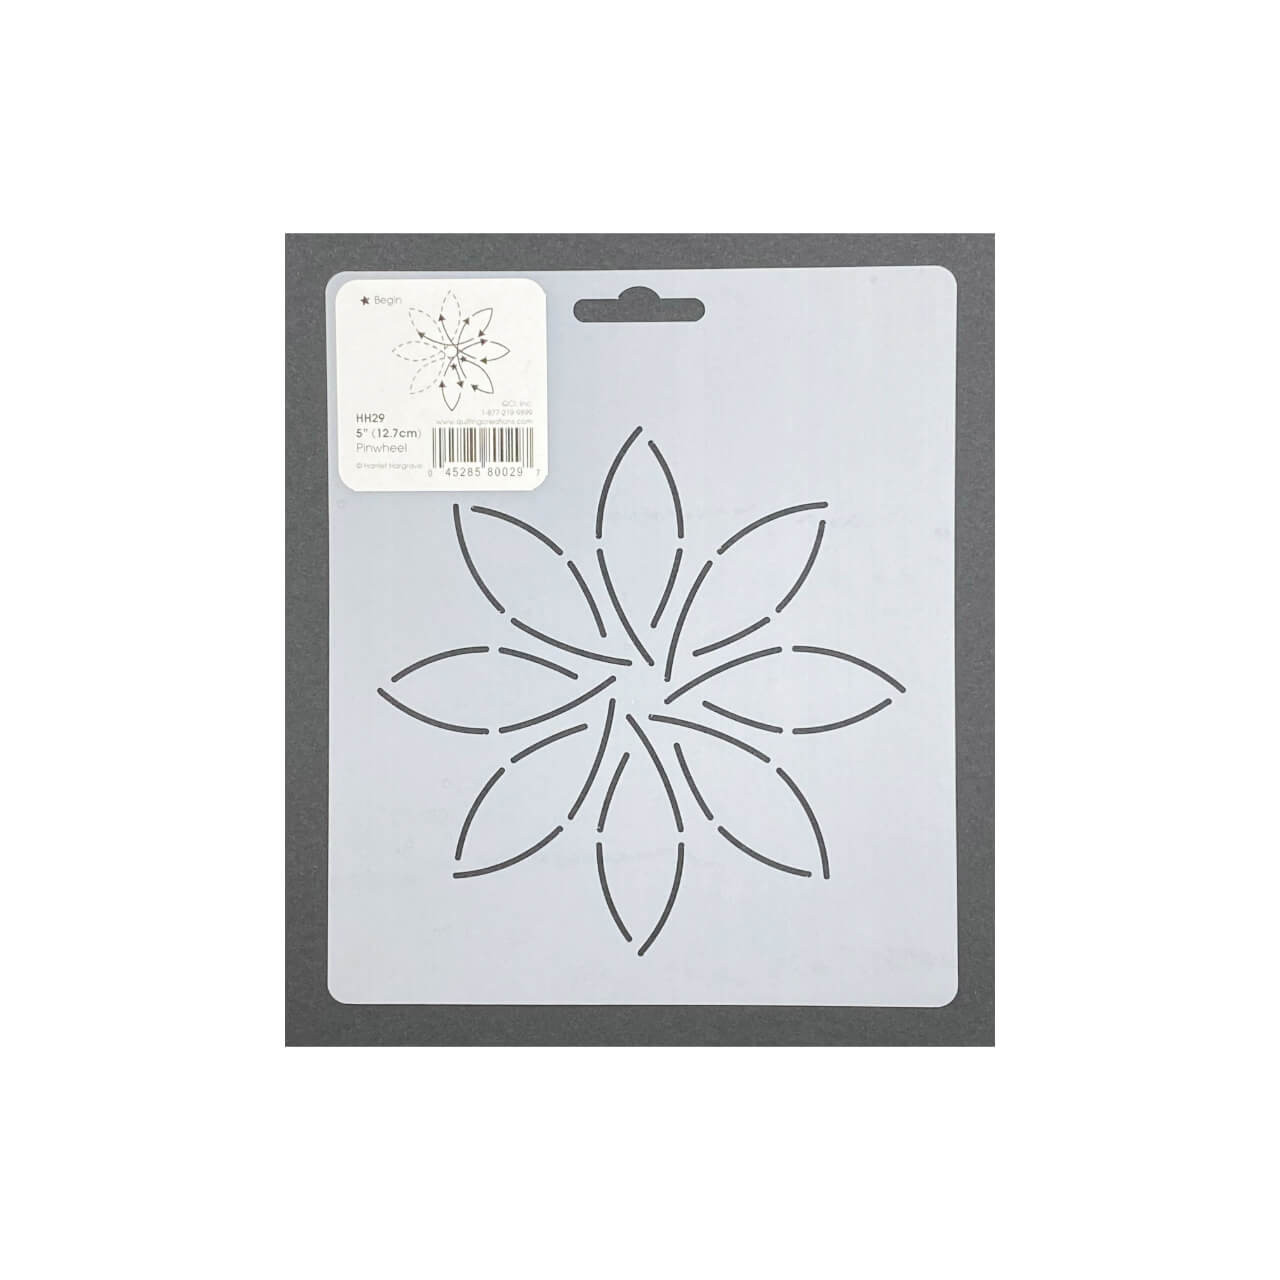 Quilting Creations 5-inch Pinwheel Quilting Block Stencil